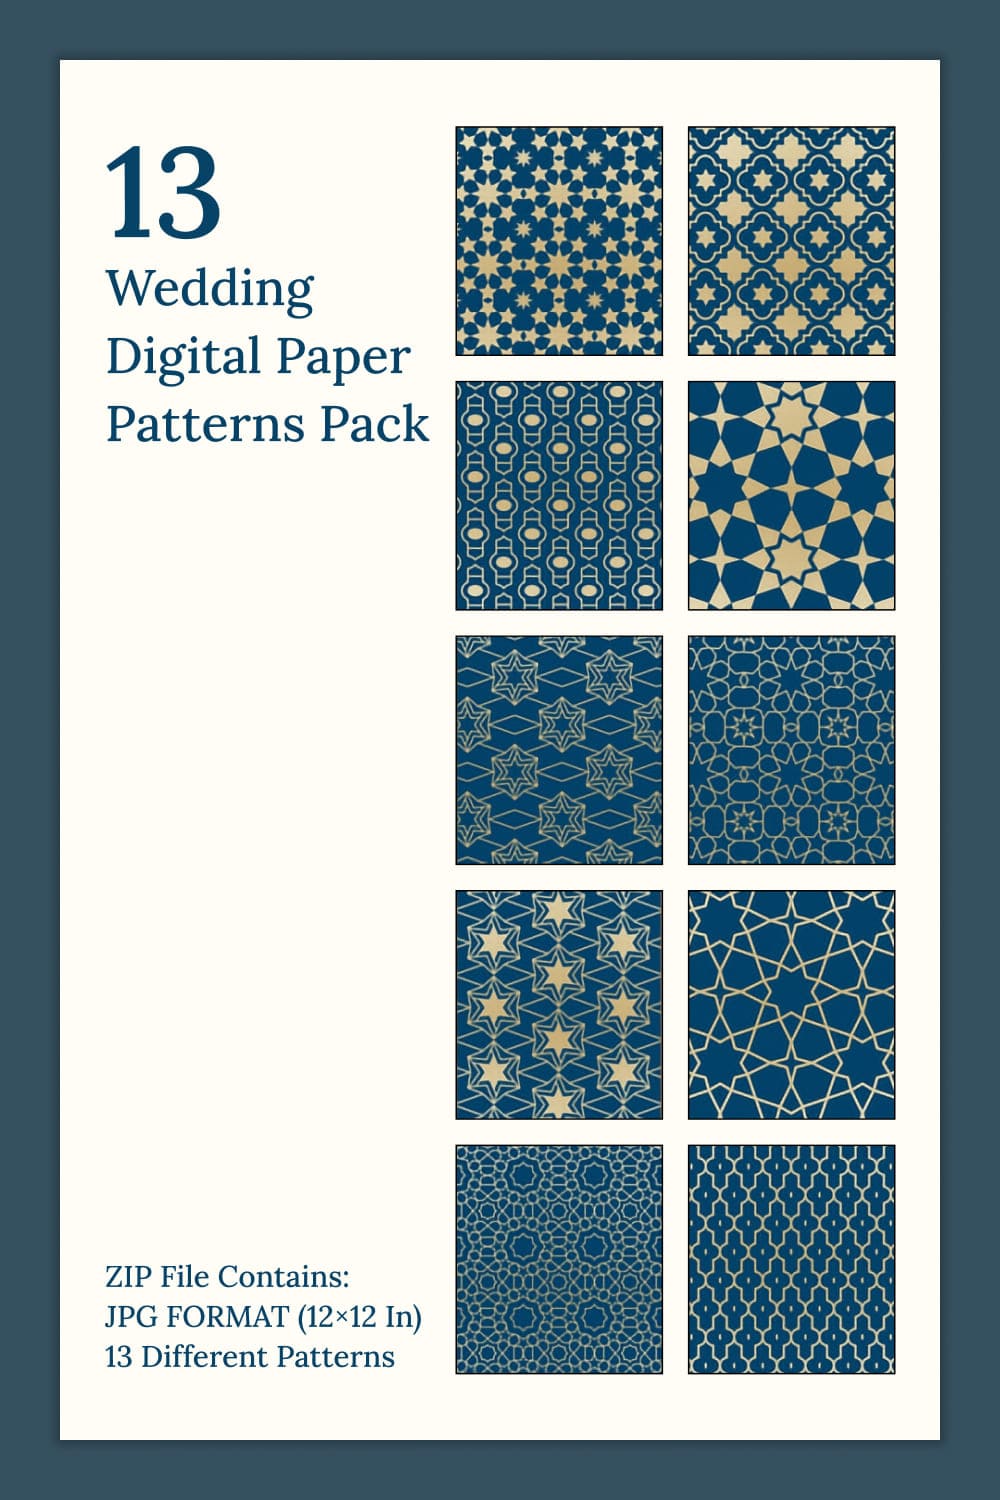 Dark blue background on which patterns are drawn in gold.